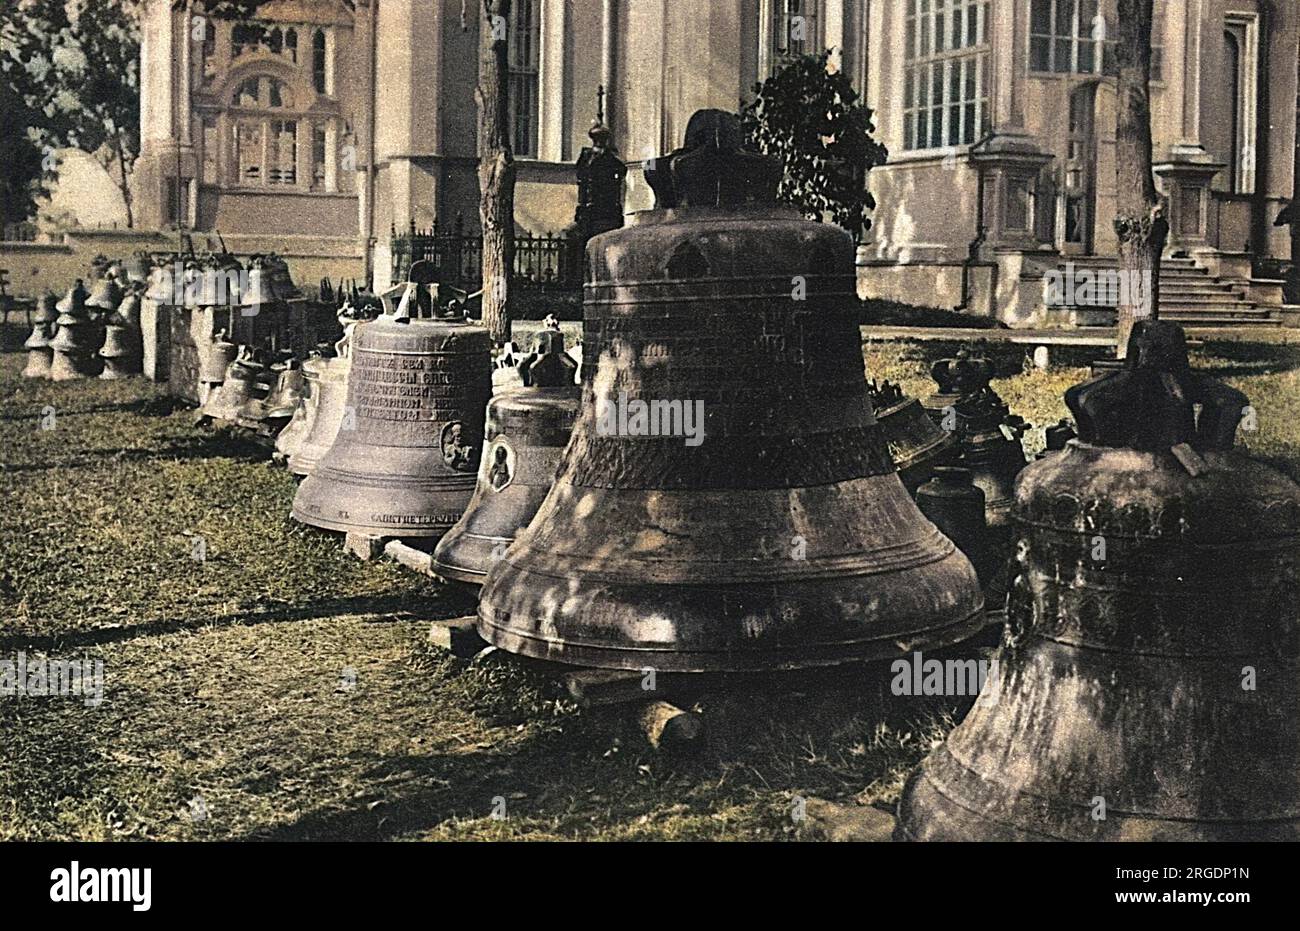 Placed together for safety in the Nikolsky Monastery near Moscow, some of the 300 Russian church bells removed to prevent invading Germans re-using them as metal for shells. Some of the bells are ornamental in design and decoration, showing medallions of priests and bishops in bas relief. Stock Photo